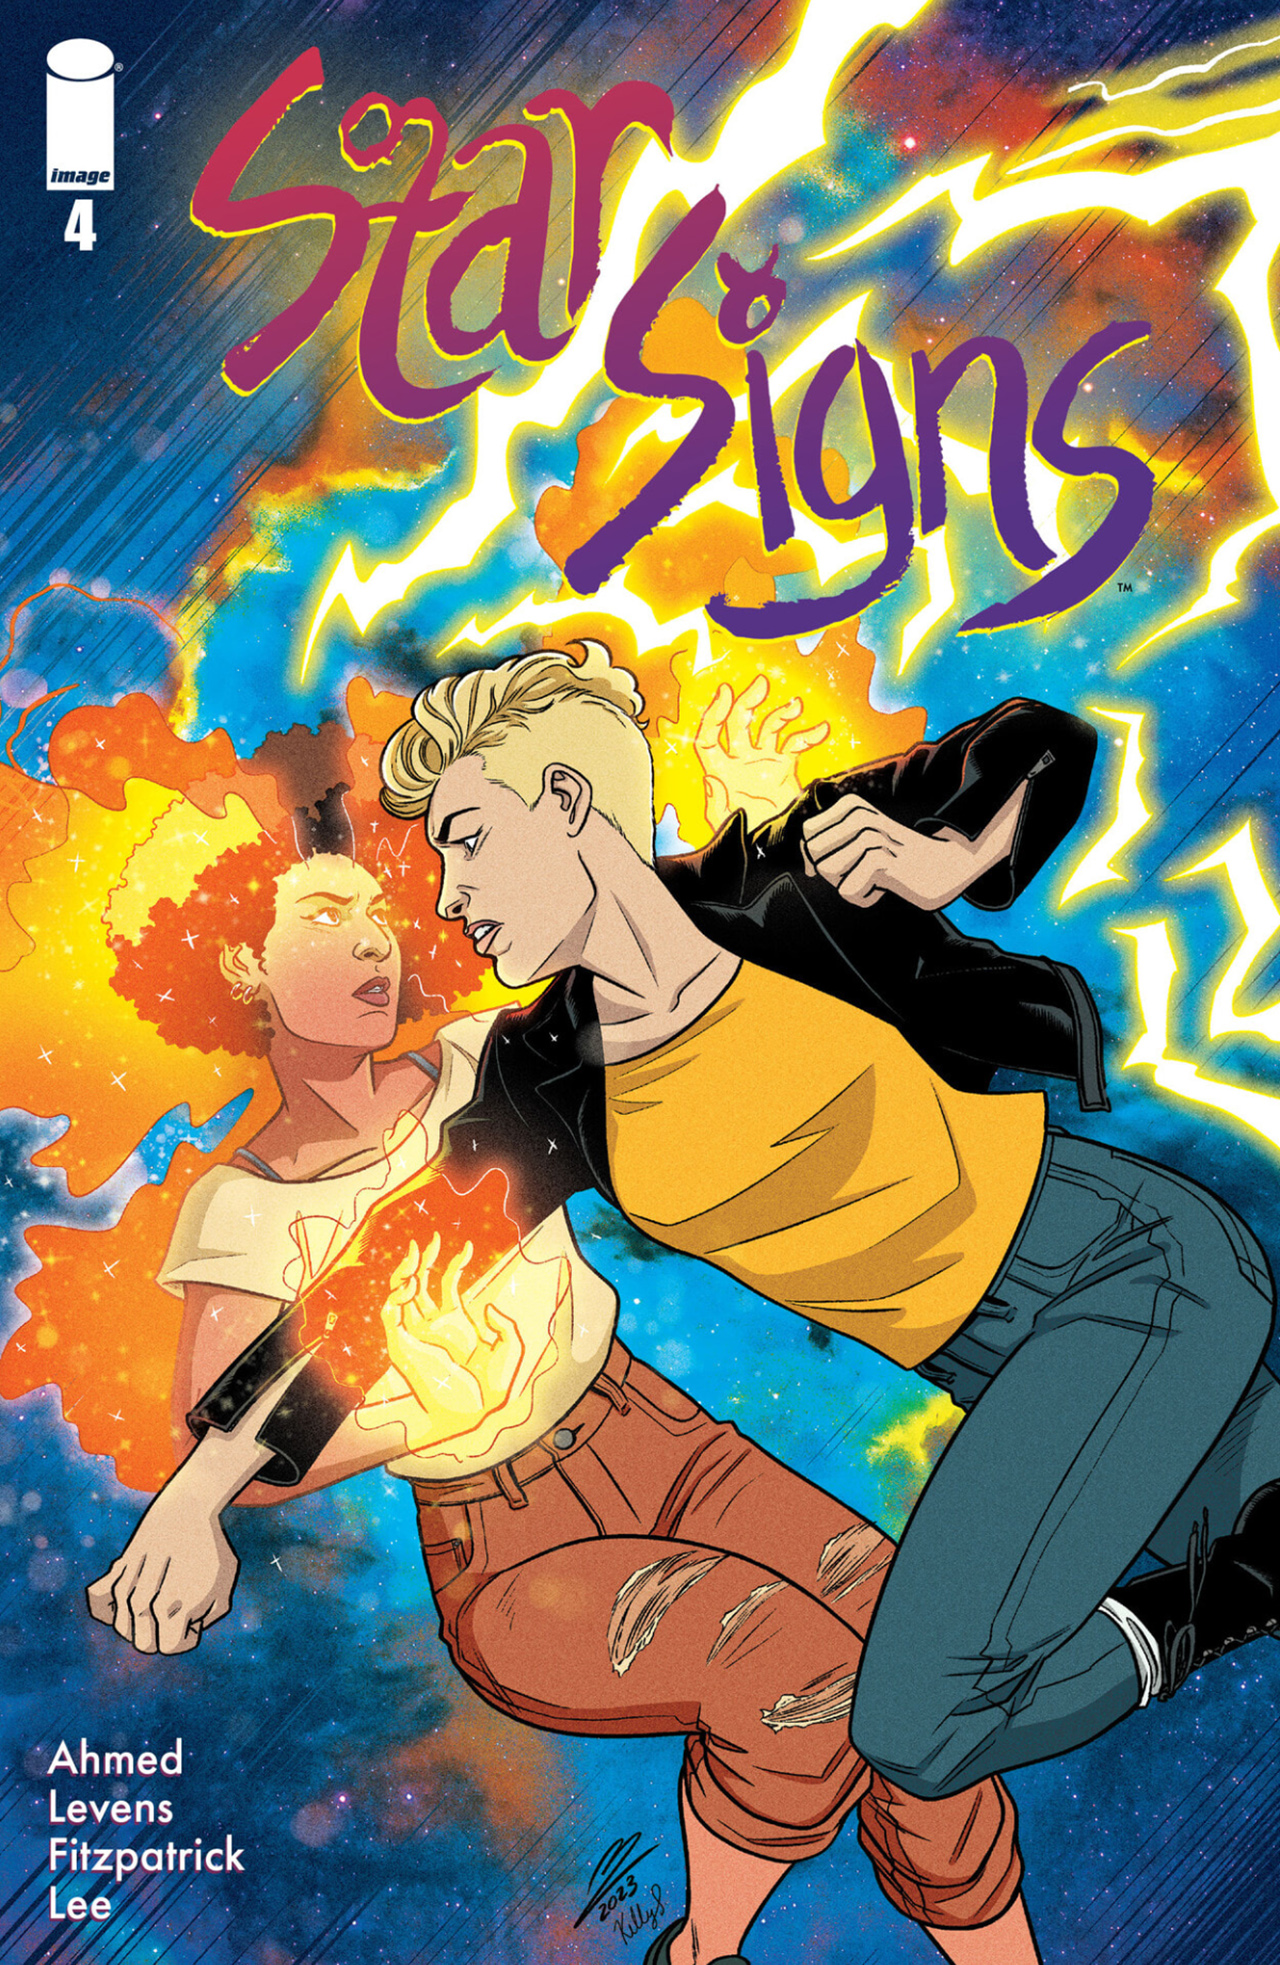 Read online Starsigns comic -  Issue #4 - 1